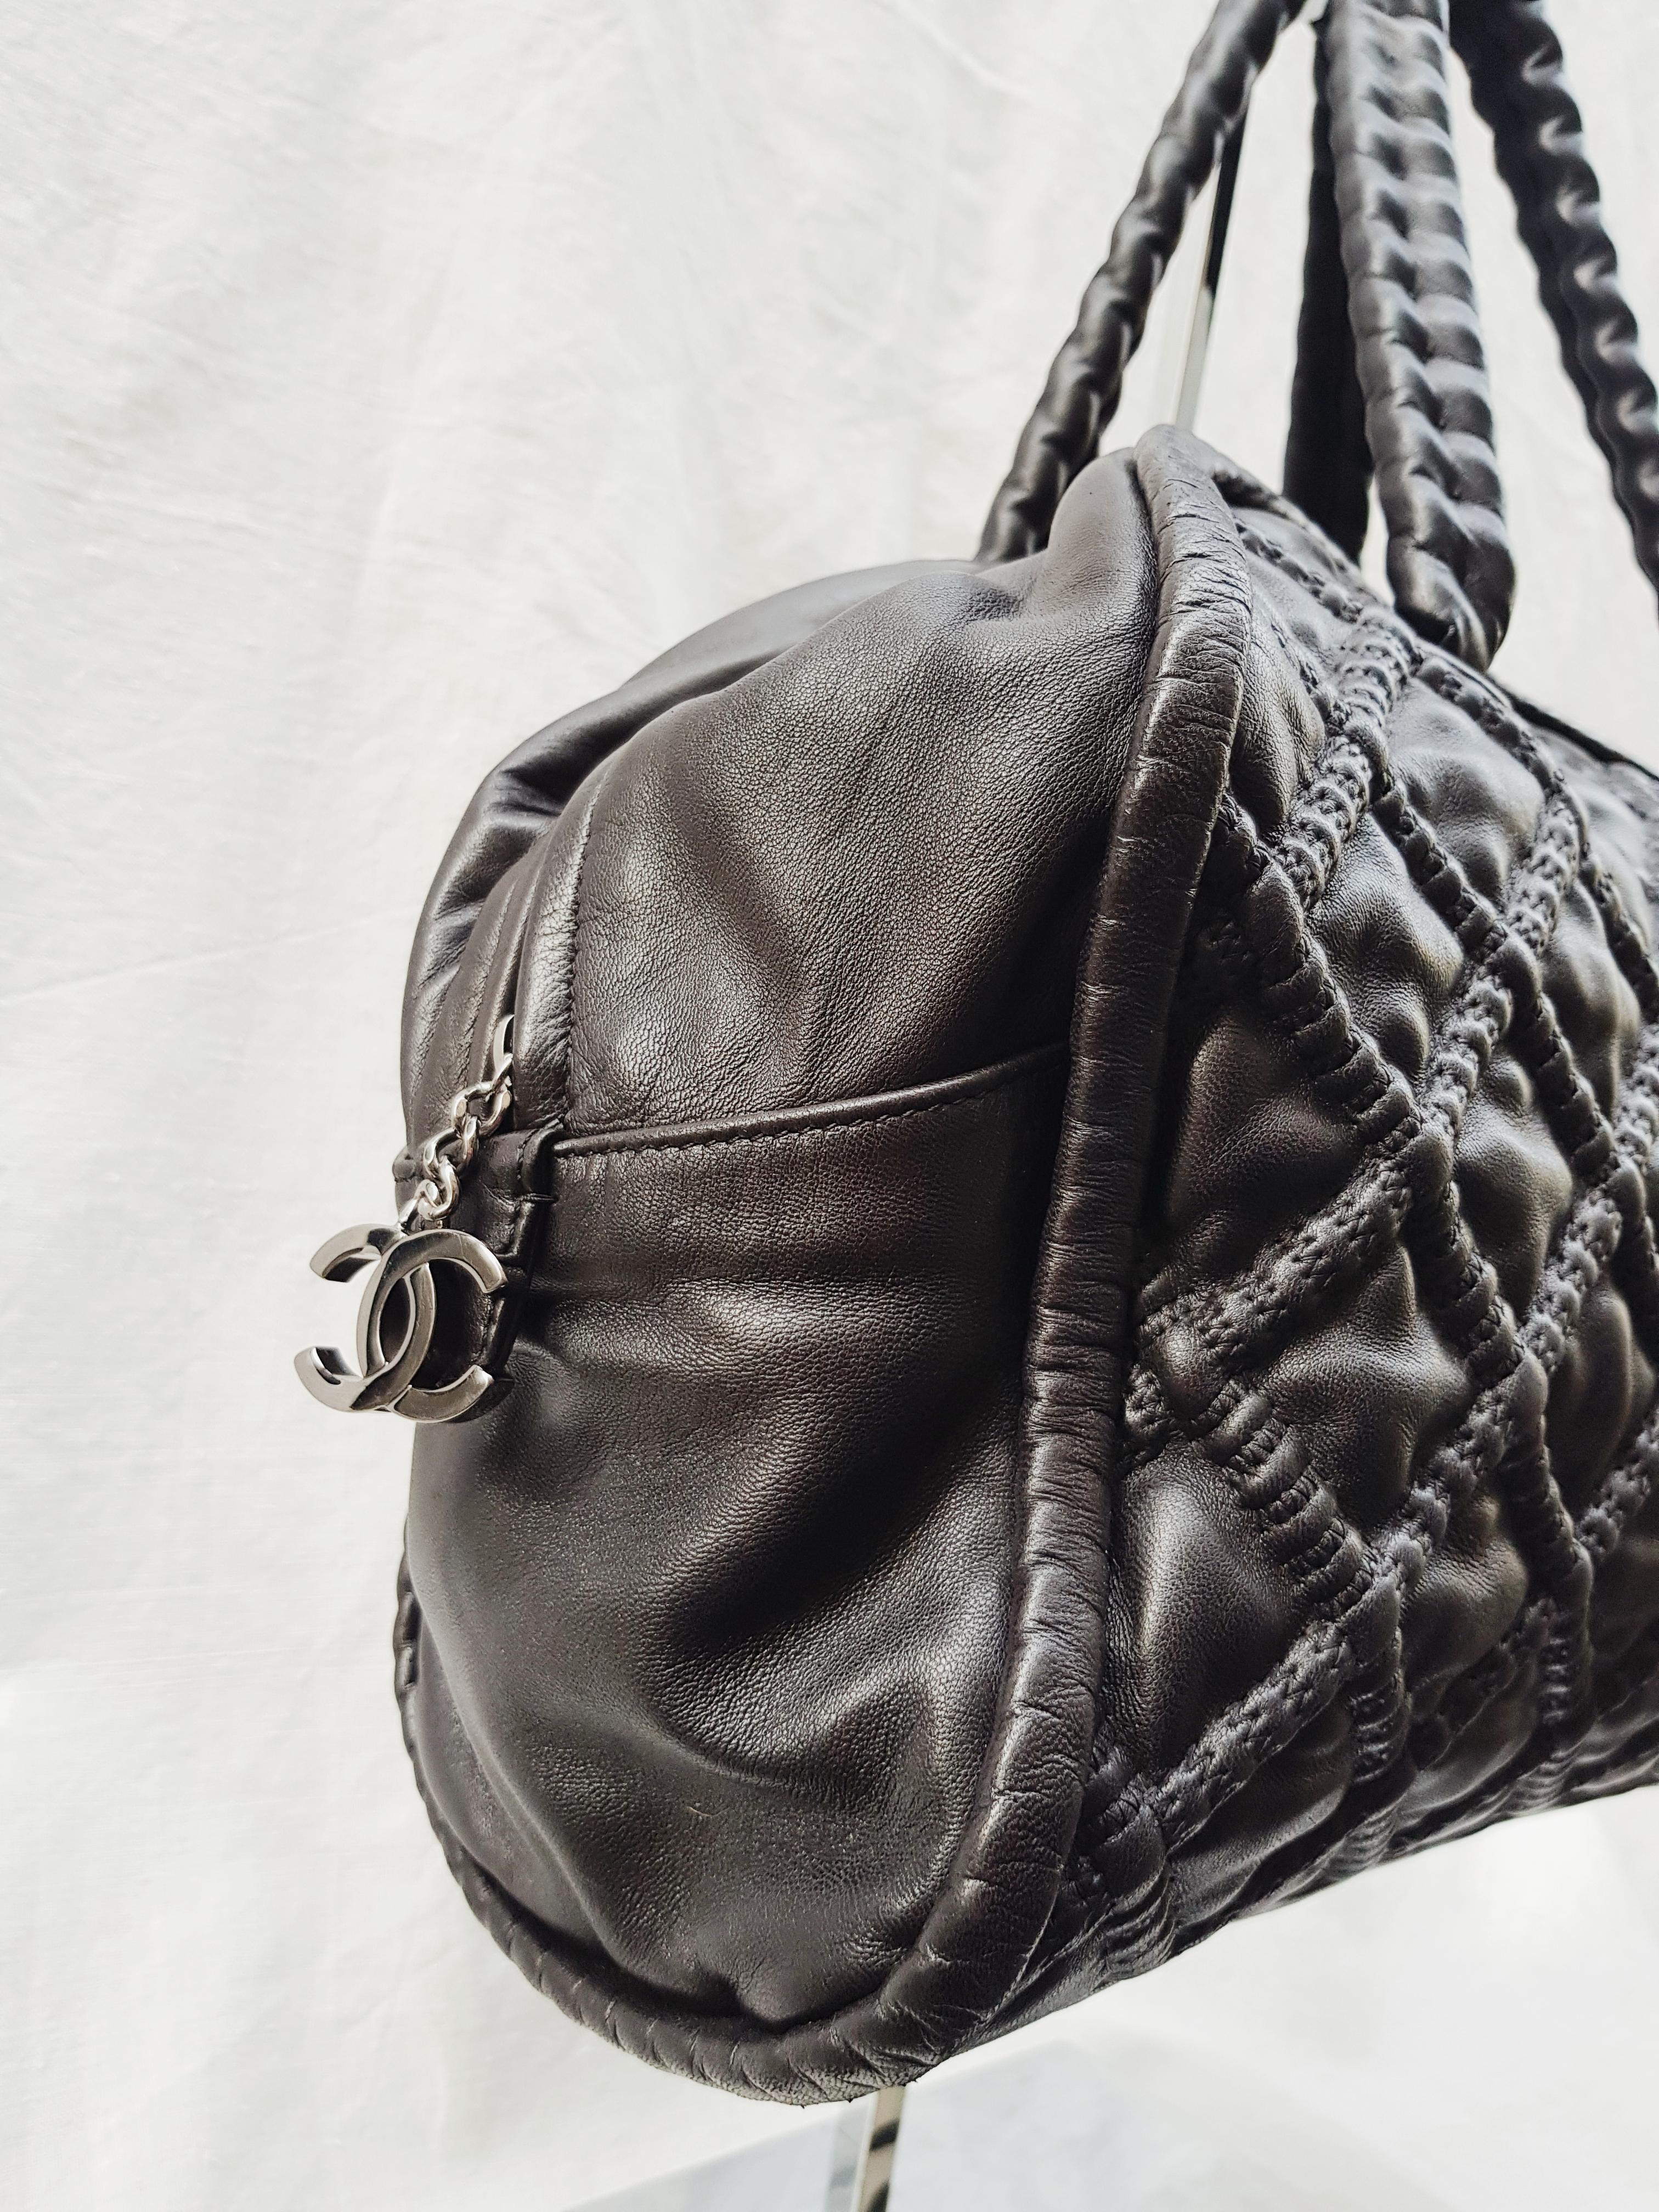 This fantastic Chanel bowler bag is crafted from black quilted lambskin leather, featuring dual-hidden chain leather handles, CC charm zipper pull, and silver-tone hardware accents. Its zip closure opens to a black satin-lined interior with zip